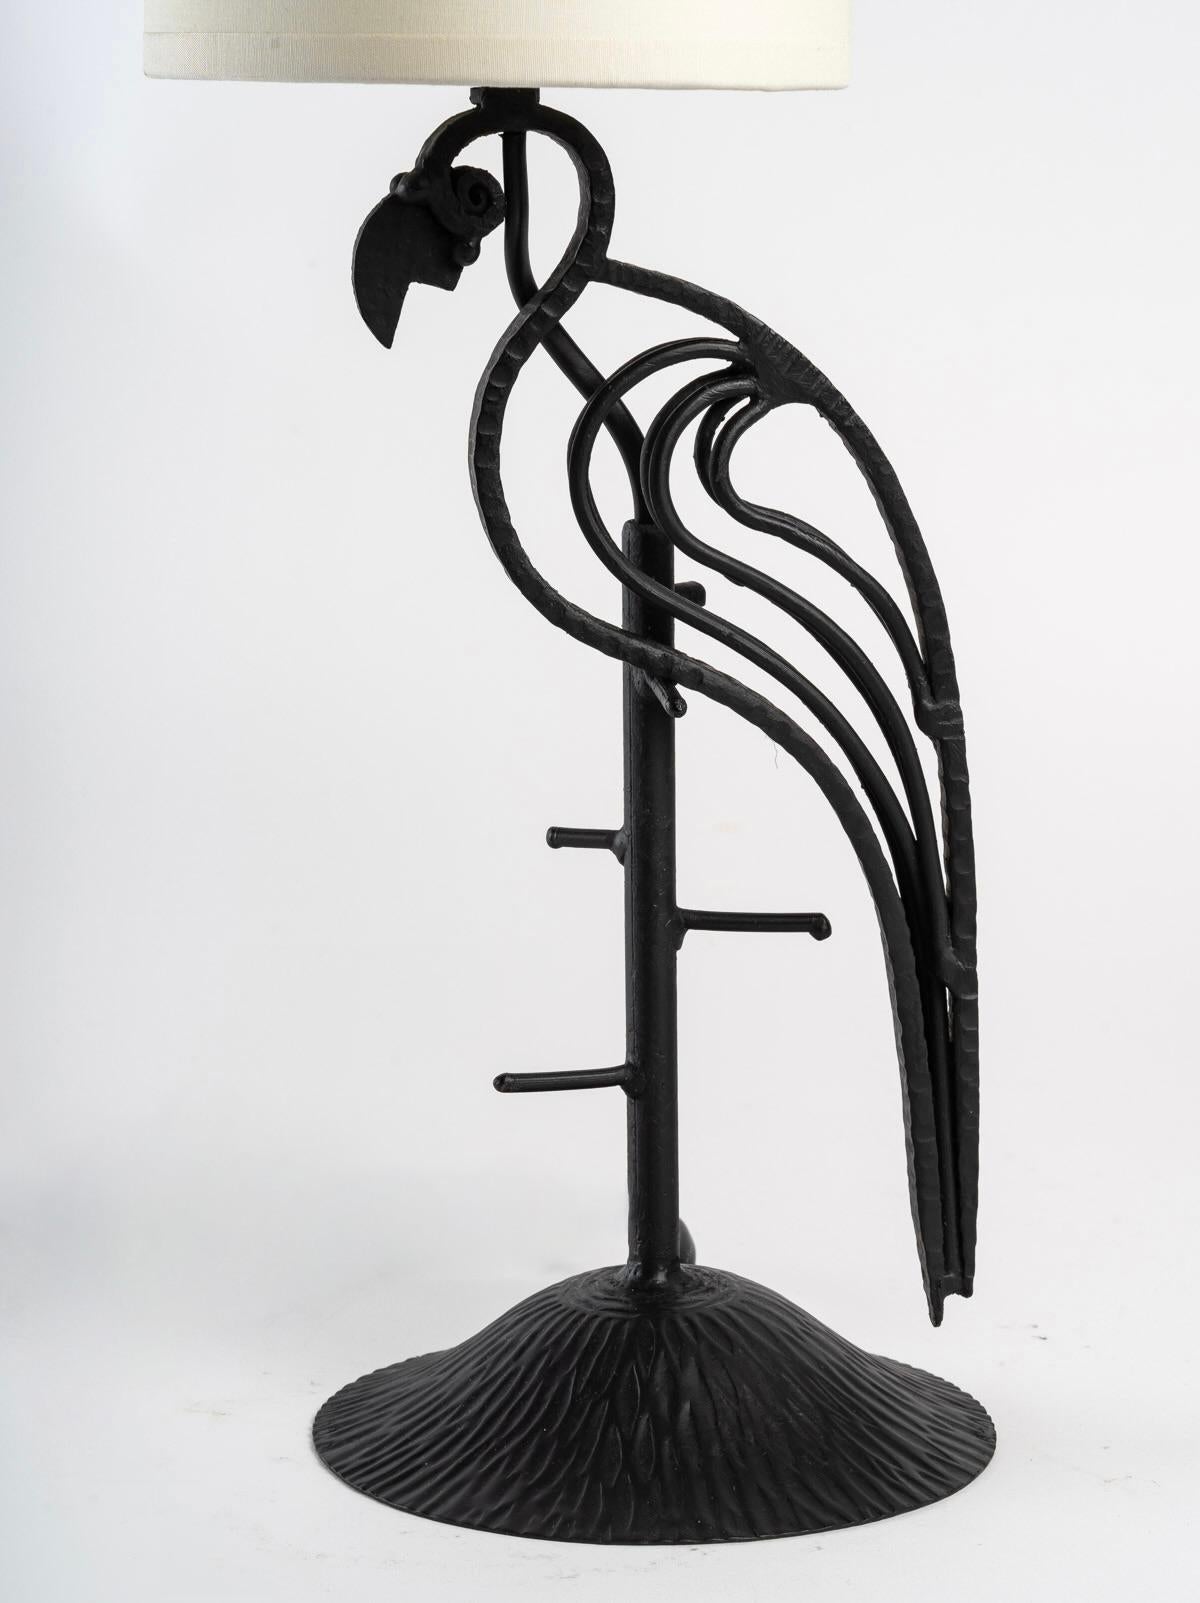 
The lamp rests on a round base in hammered black wrought iron on which is placed a rod like a perch.
On the top of the perch, a parrot is posed, it is made by several fine rods worked by hand in black wrought iron, some are hammered.
The lamp is